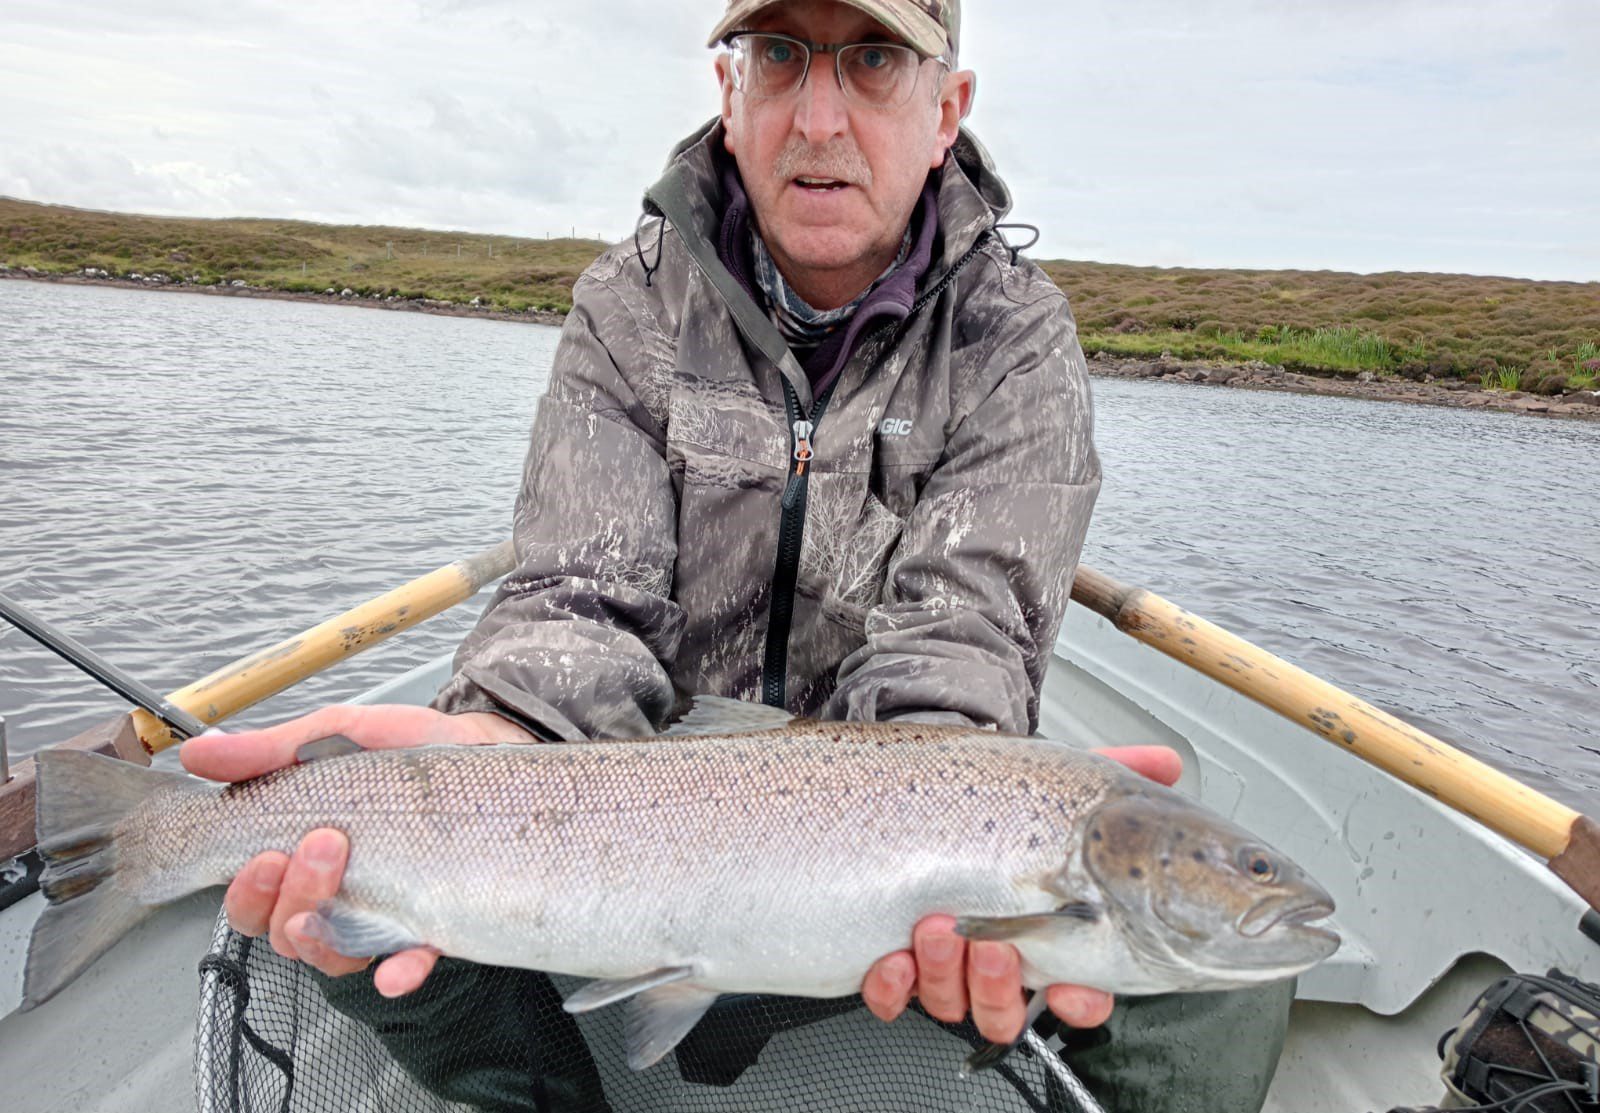 A magnificent 7lb sea trout from Loch Roag (South Uist) for John Grey during July which was released